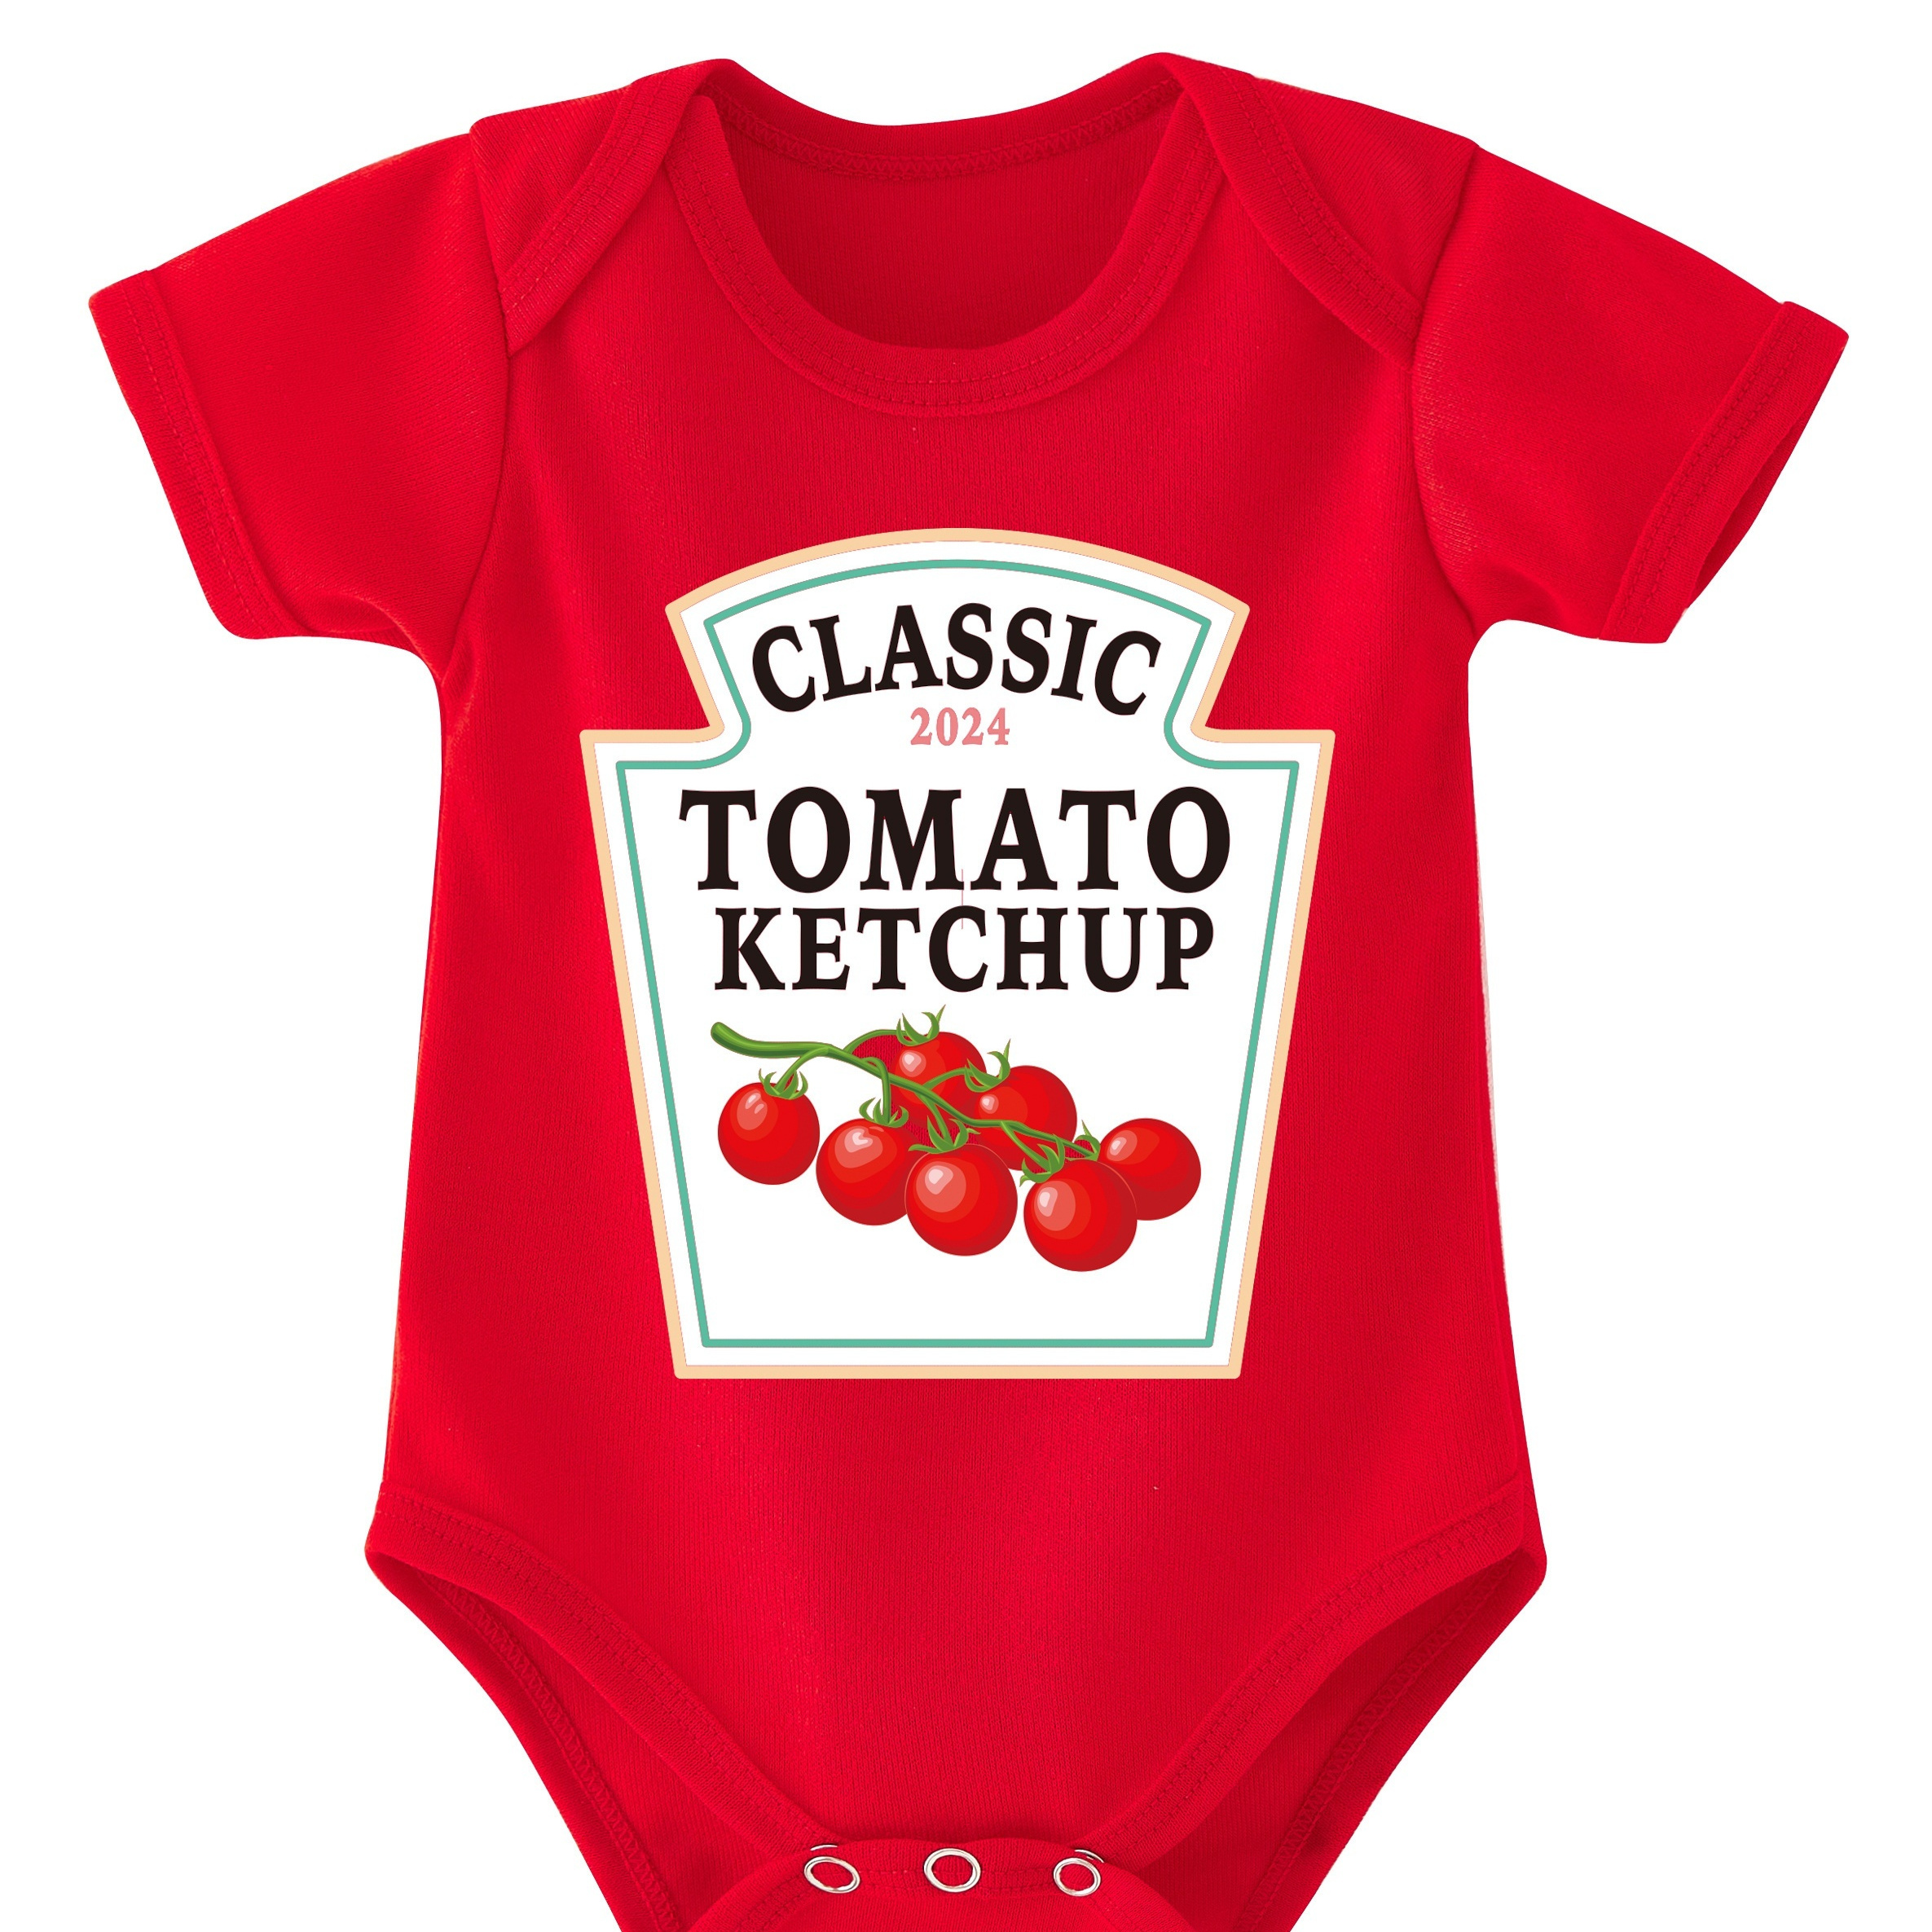 

Classic Tomato Ketchup " Stylish Letter Print Newborn Onesie, Summer Short Sleeve Baby Triangle Romper, Cartoon Tomato Sauce Pattern Infant Triangle Puffer Coat, Pregnancy Gift